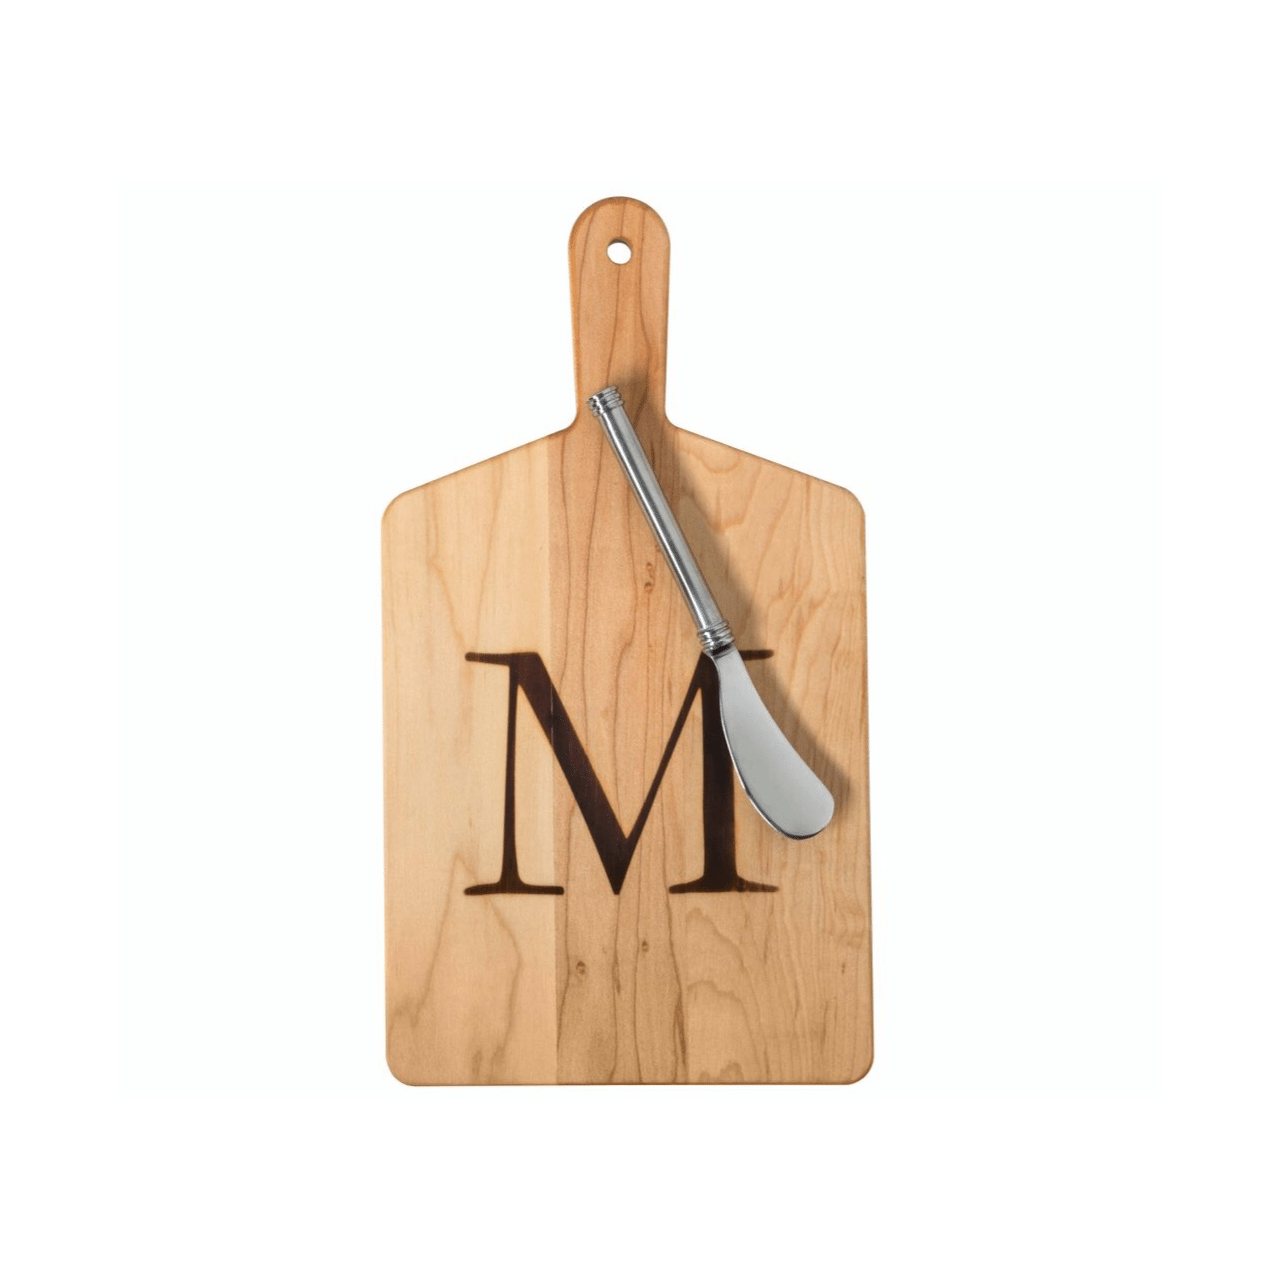 Maple Cheese Board with a Stamped E and Metal Spreader